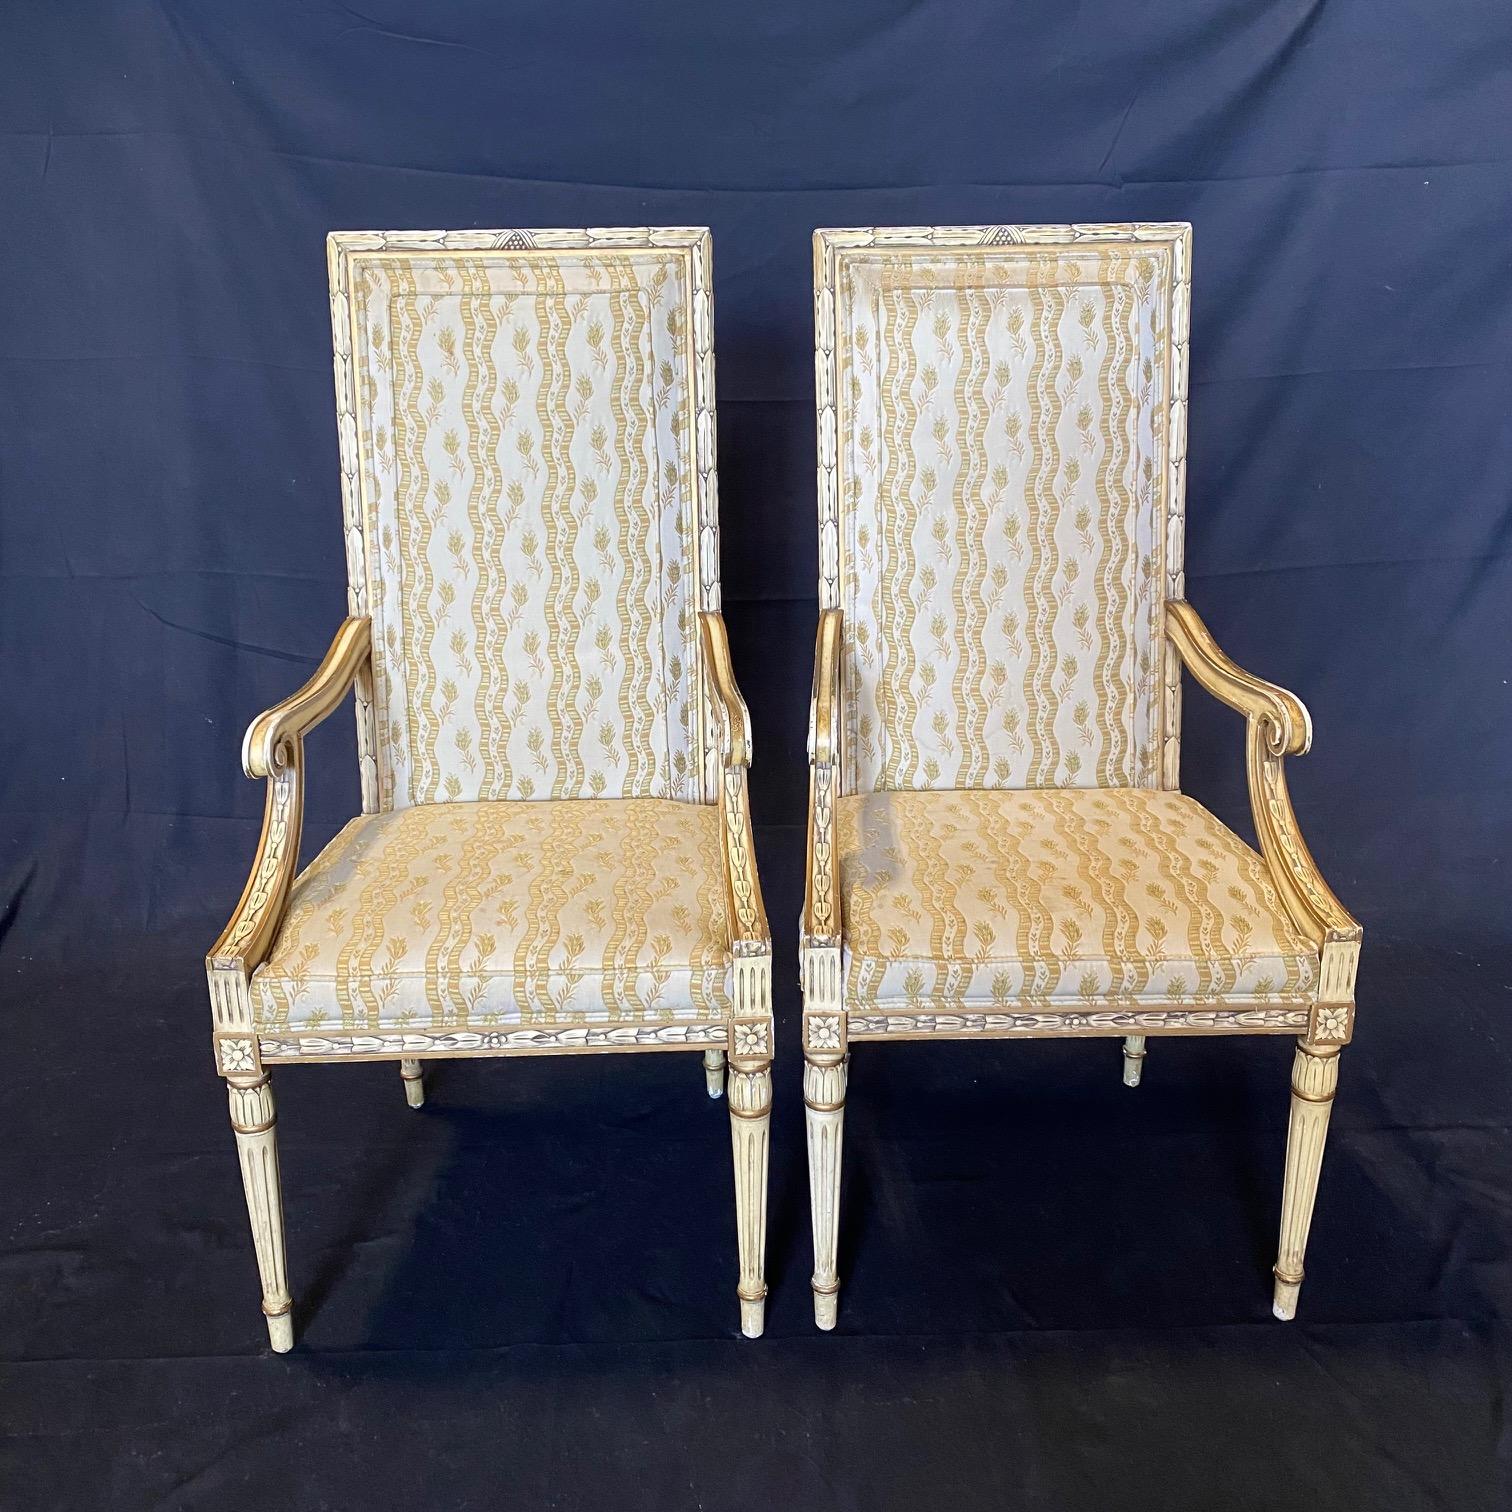 Two classic vintage Karges French Empire neoclassical dining chairs, arm chairs or accent chairs. These luxurious chairs are painted white with gold carved accents, scrolled arms, saber legs and original super luxe upholstery. seat height 18.5 arm